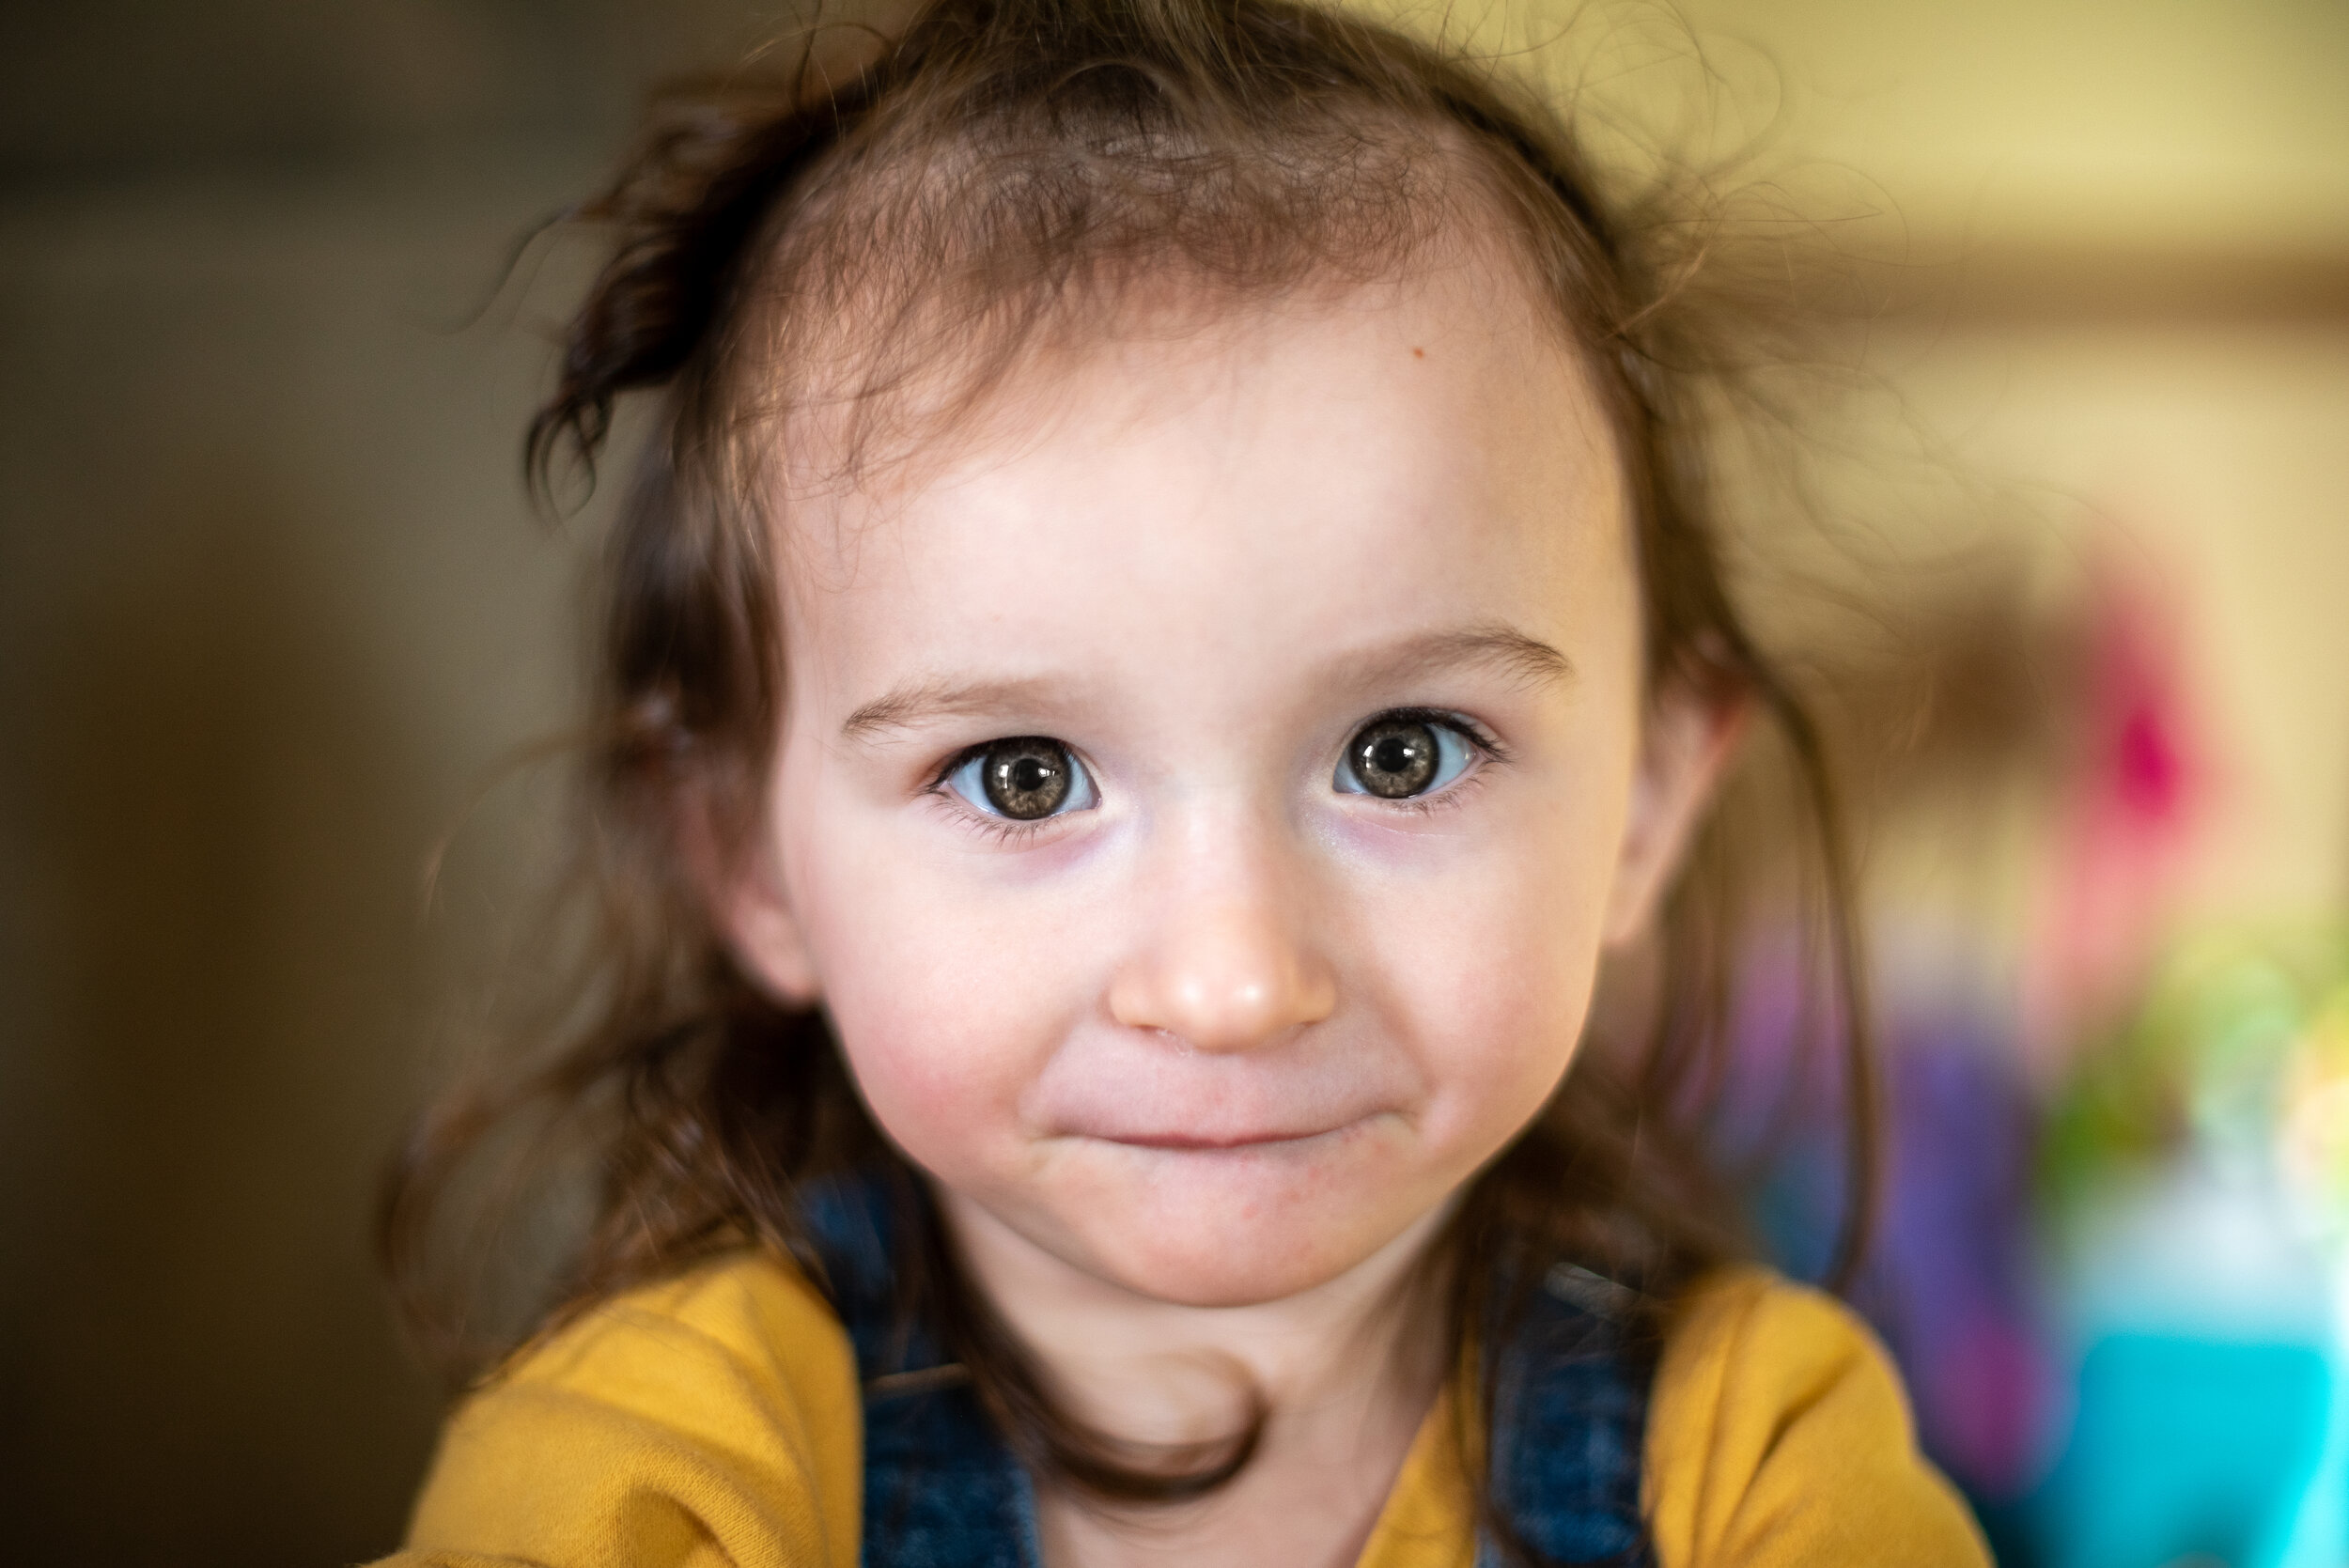 little girl with grey eyes and brown hair wearing a yellow shirt looking at camera